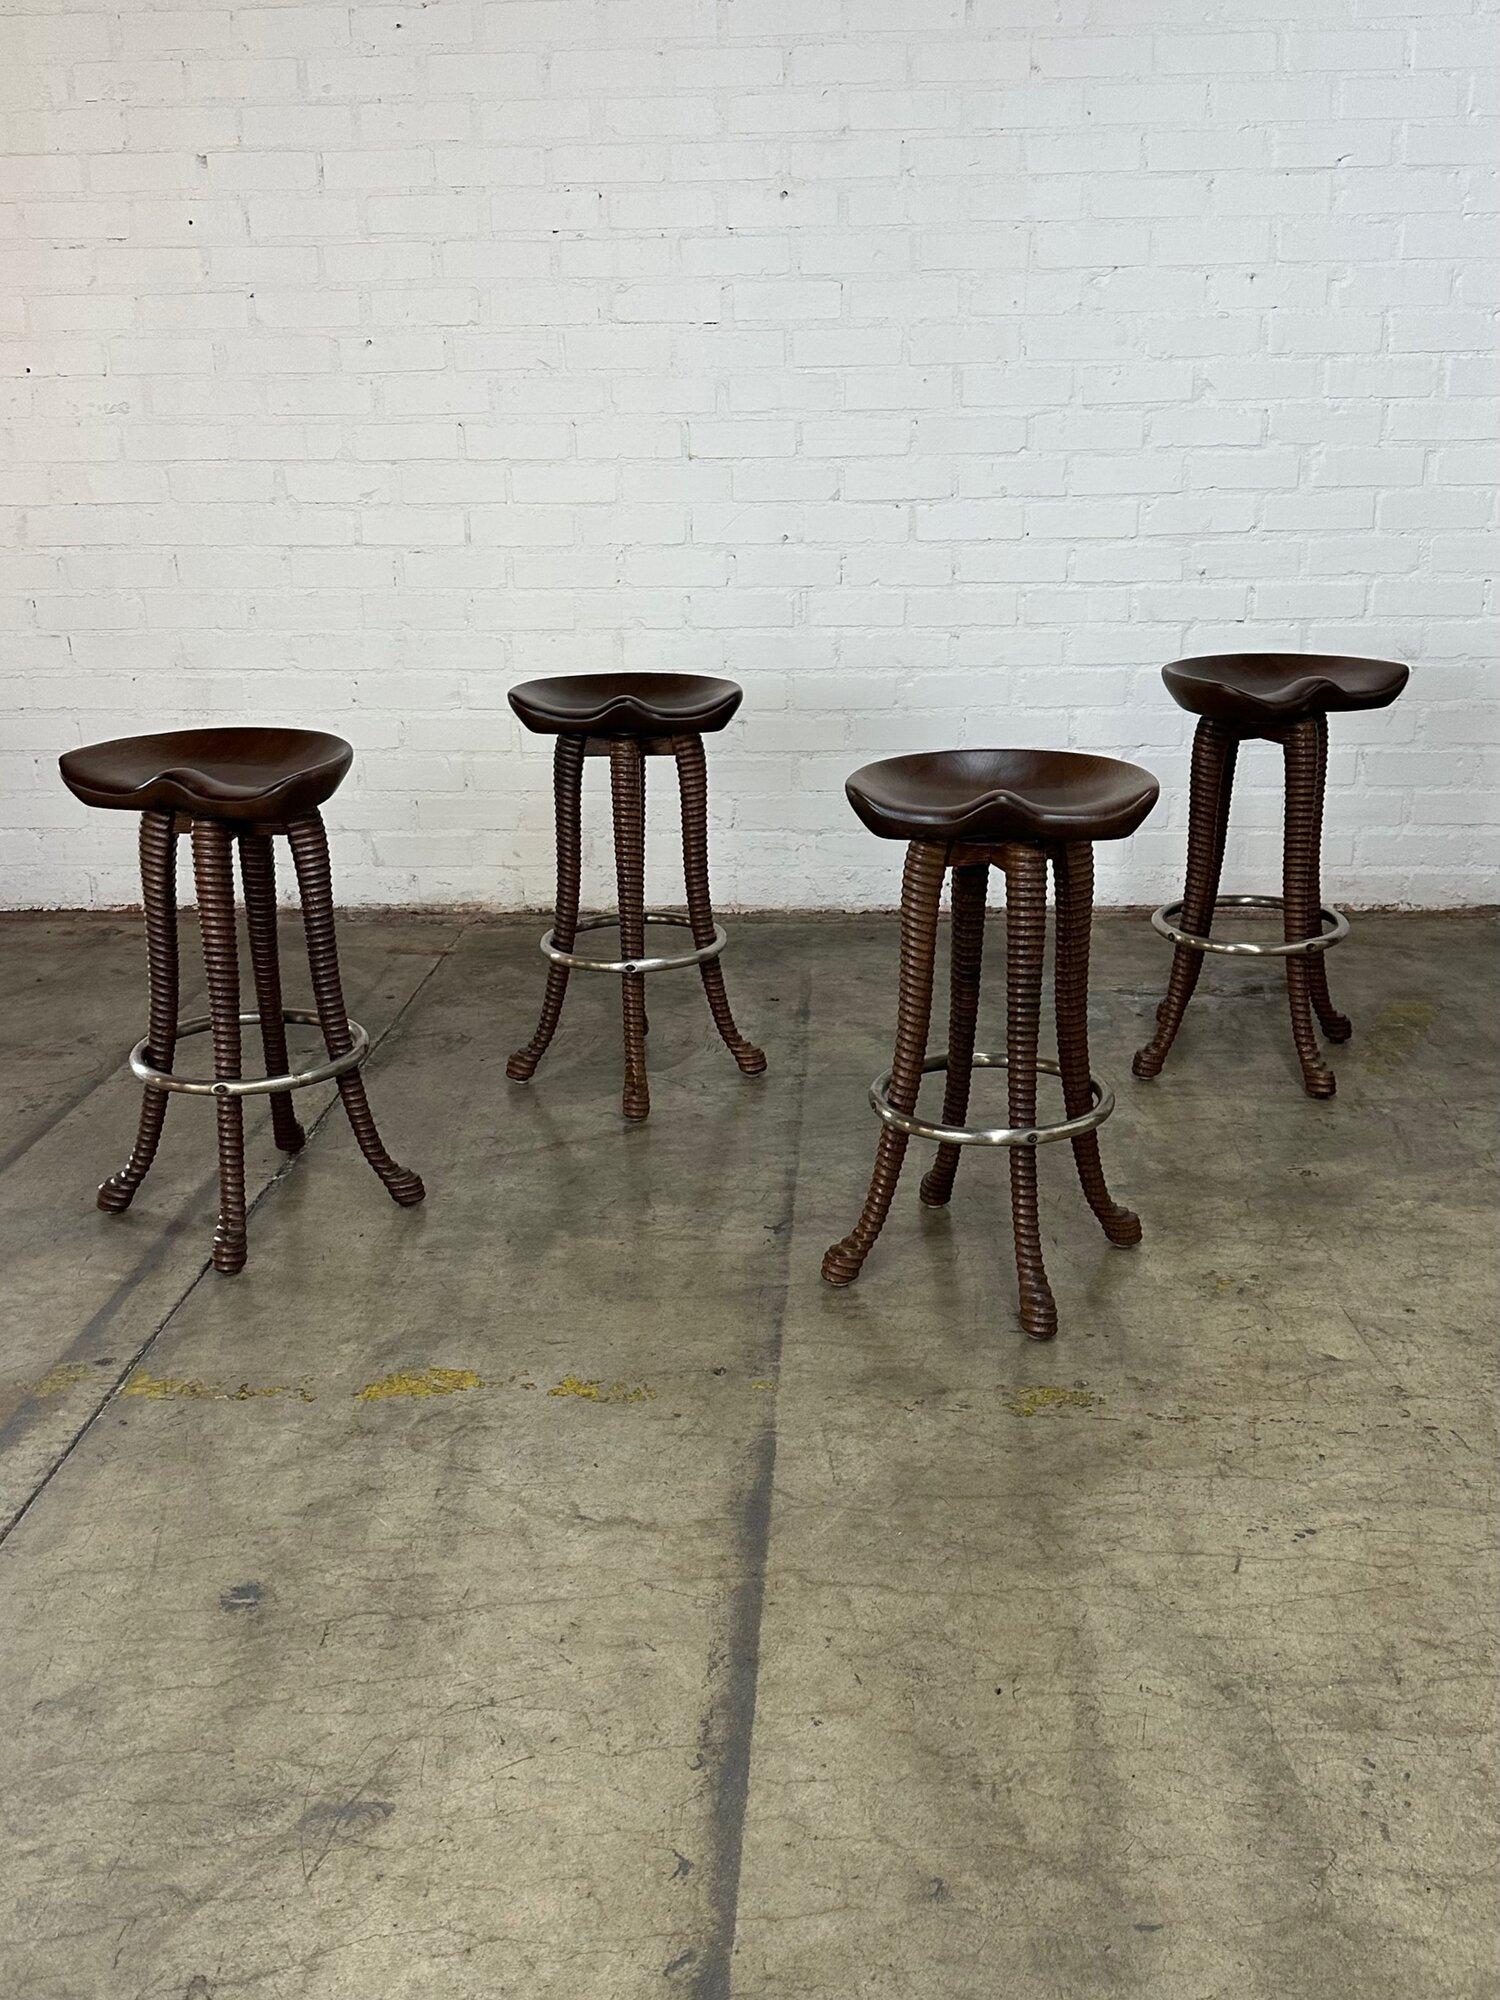 W17 D17 H31 SW17 SD13 SH29

Fully refinished set of four barstools. Handcrafted out of solid oak and stained in a medium walnut finish. Barstools feature hand carved ribbed legs with a patinated chrome ring. 

circa 1940’s

